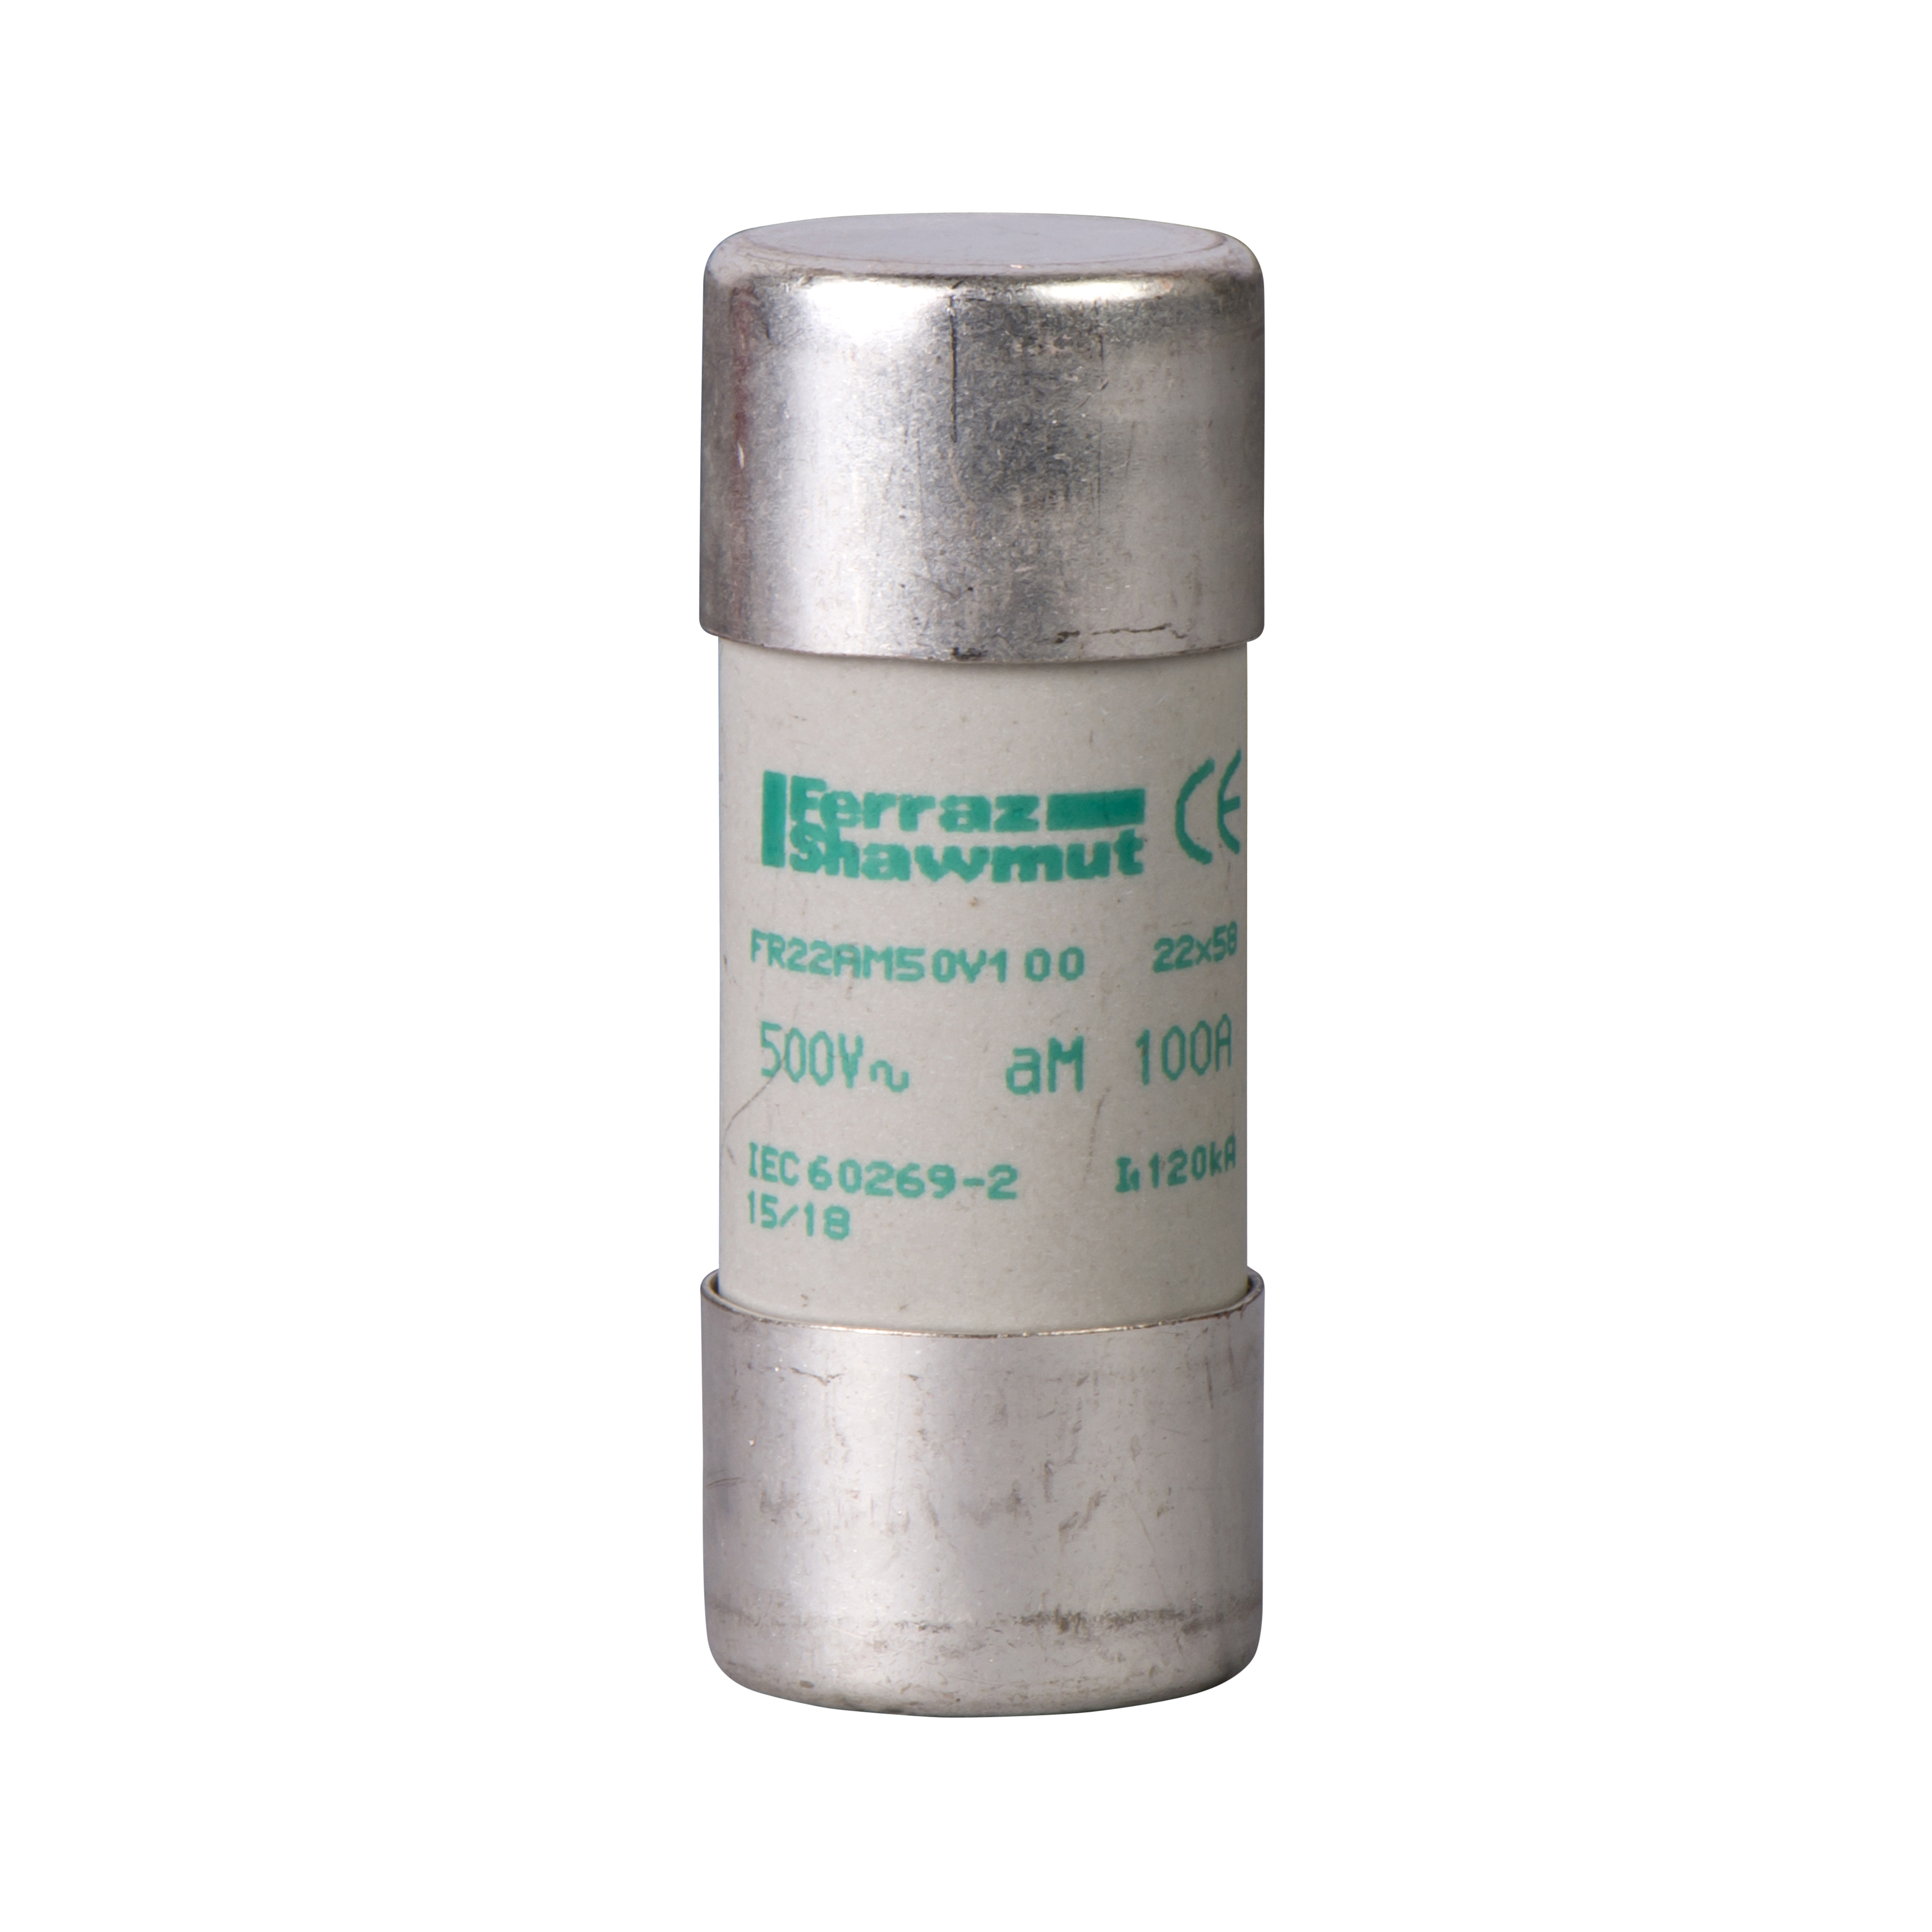 NFC cartridge fuses, TeSys GS, cylindrical, 22mm x 58mm, fuse type aM, 690VAC, 50A, without striker